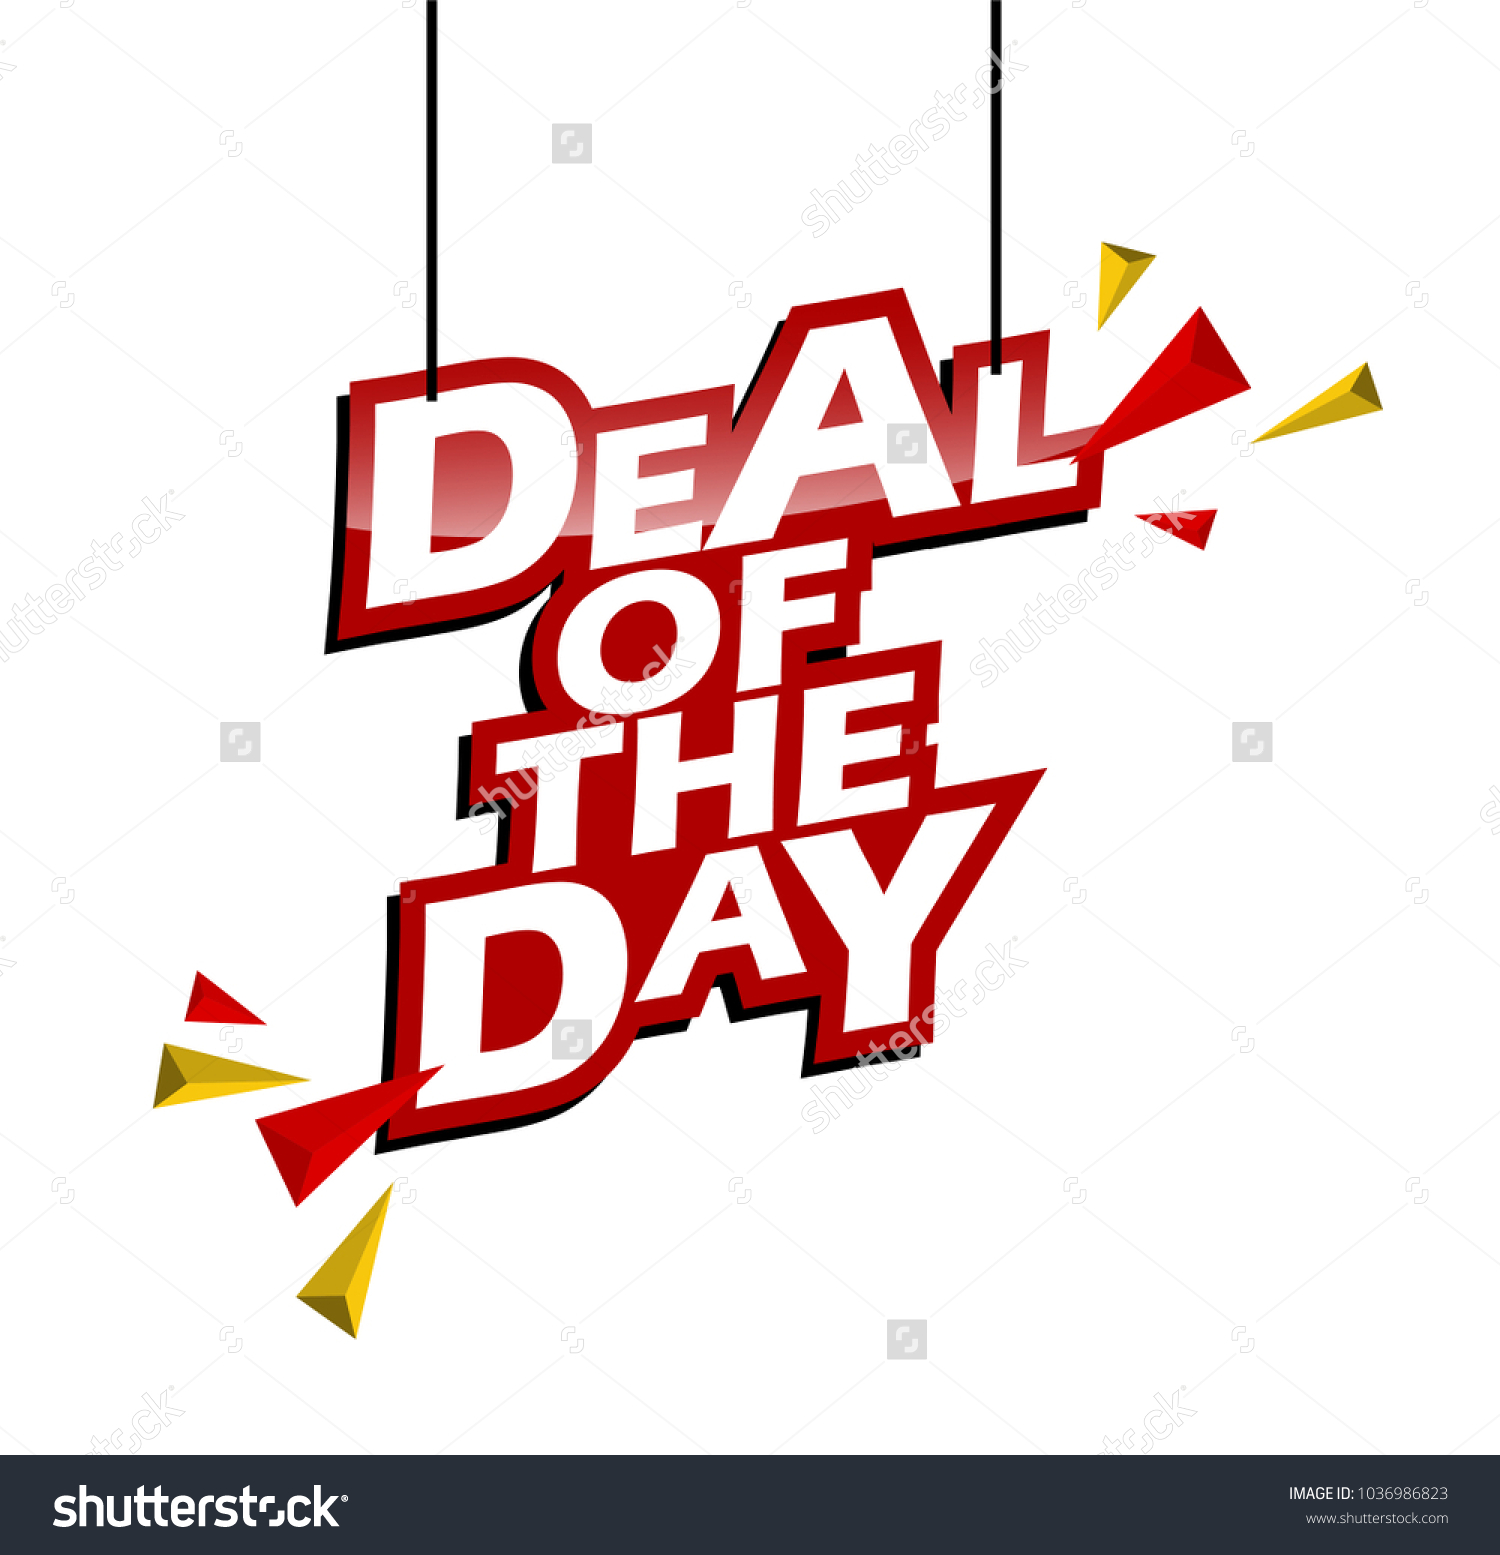 Red Yellow Tag Deal Day Stock Vector Royalty Free 1036986823